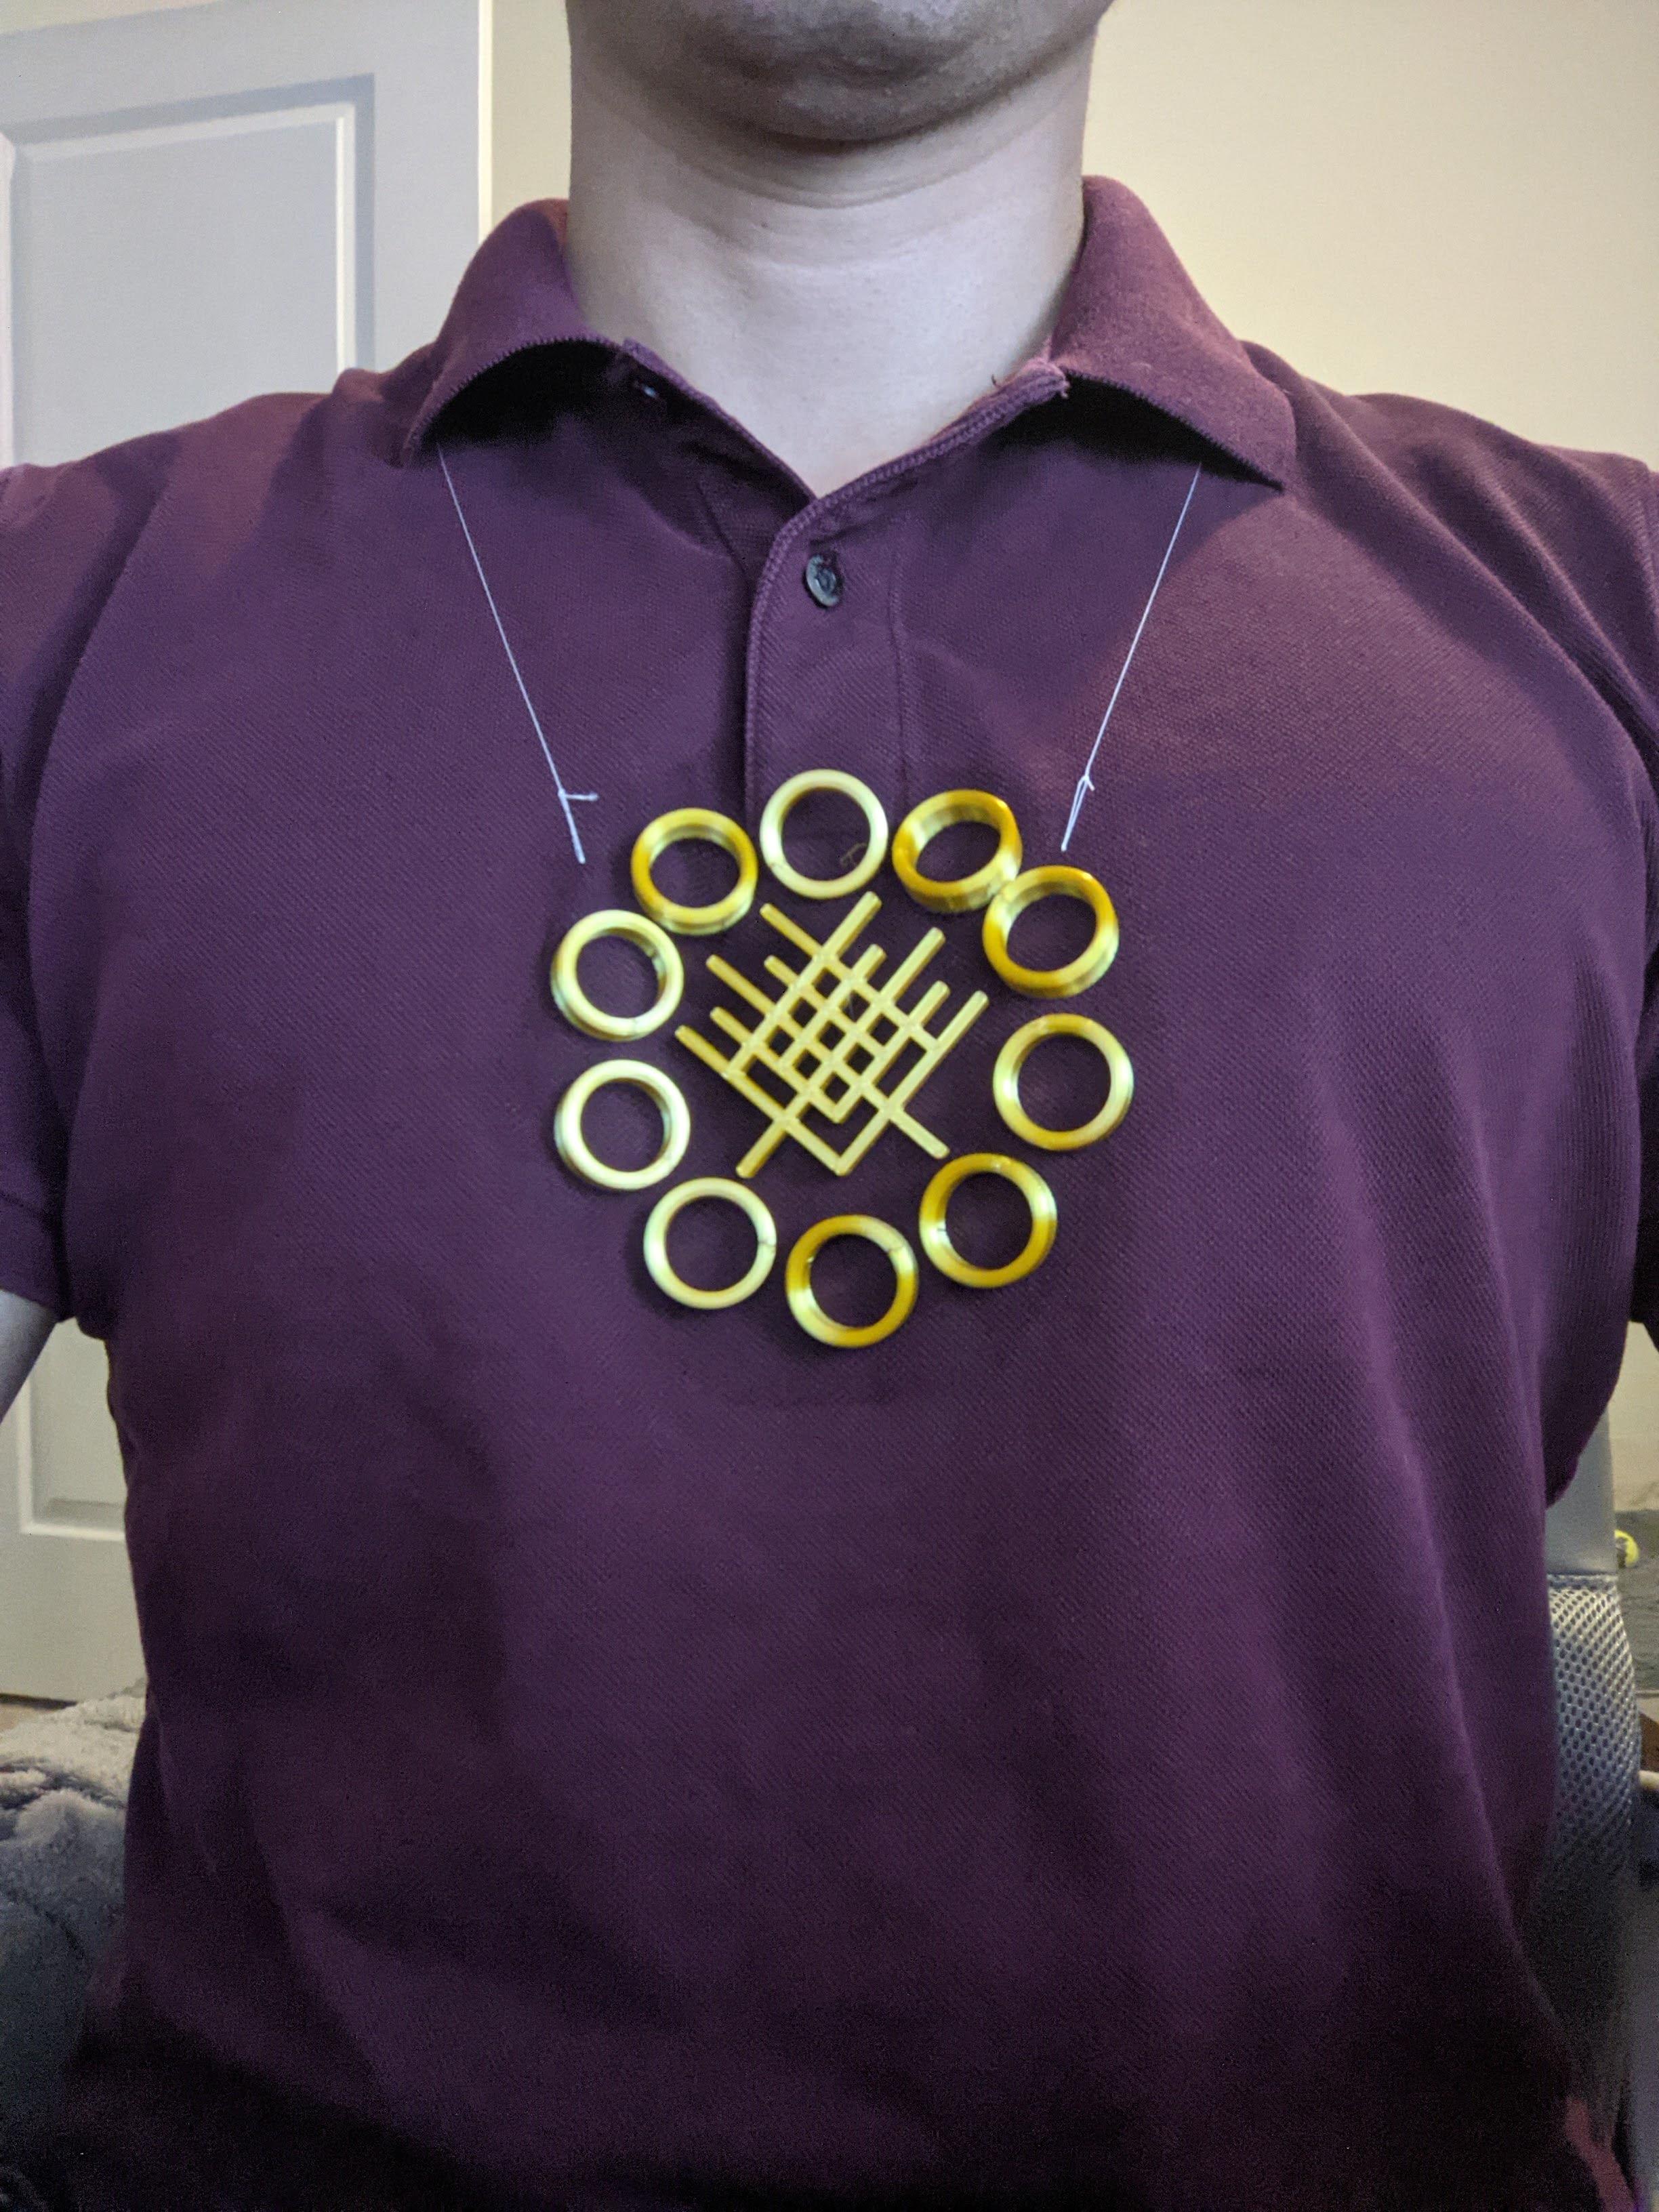 Floating Ten Rings Necklace (3D print on fabric) - The floating ten rings on a necklace - with Shang Chi's super suit flourish in the center. 

The Tulle fabric really hides well! - 3d model